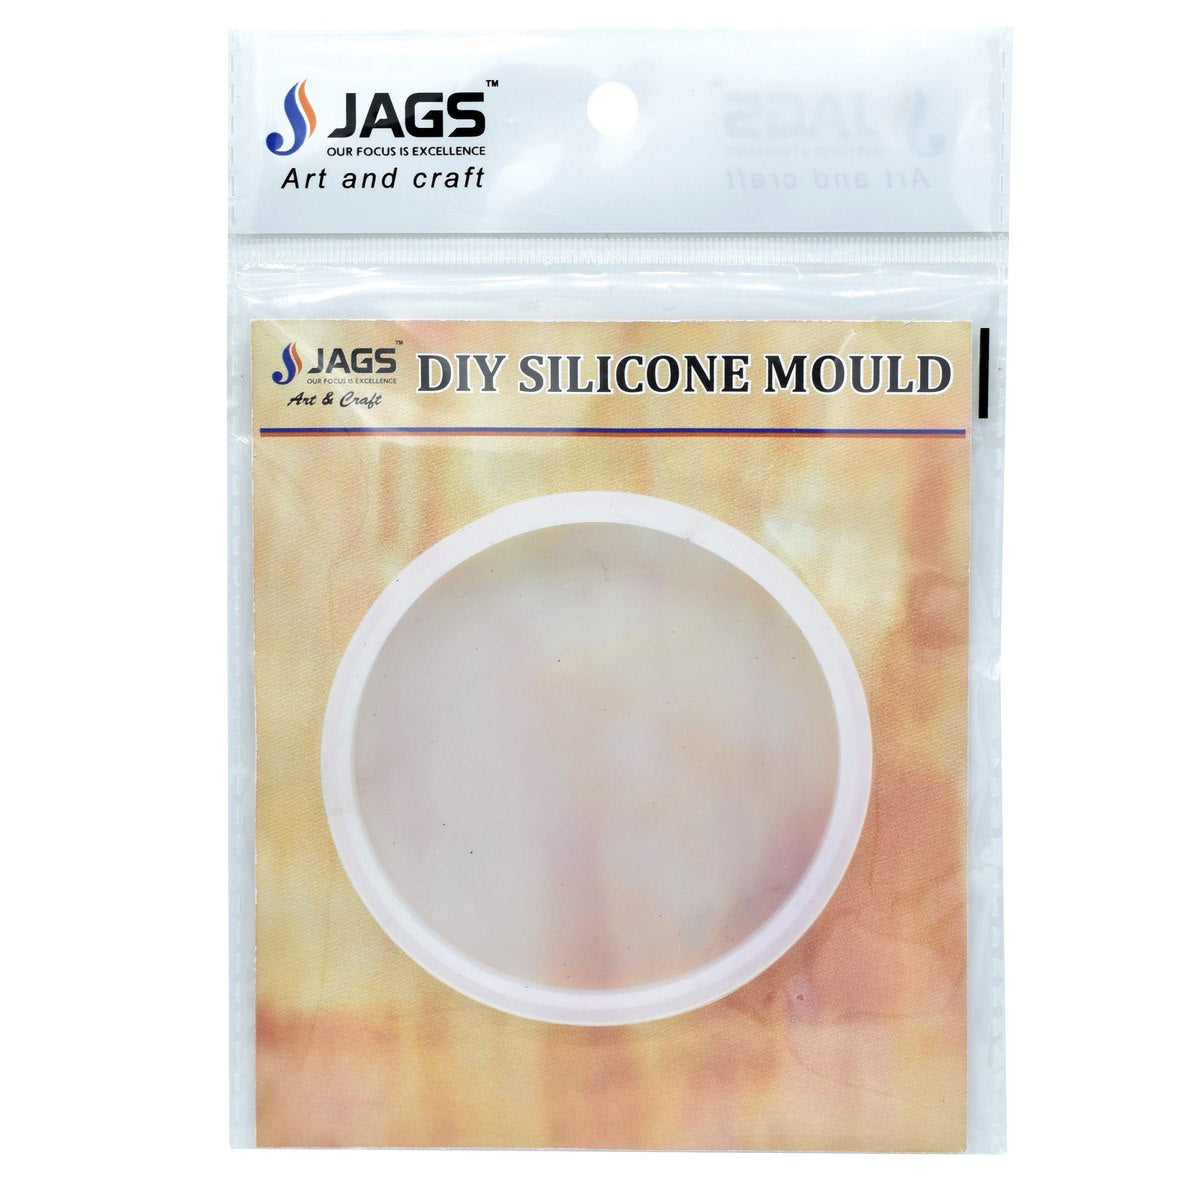 jags-mumbai Mould Silicone Mould Round Coaster 3inch 4mm Deep SMRC01